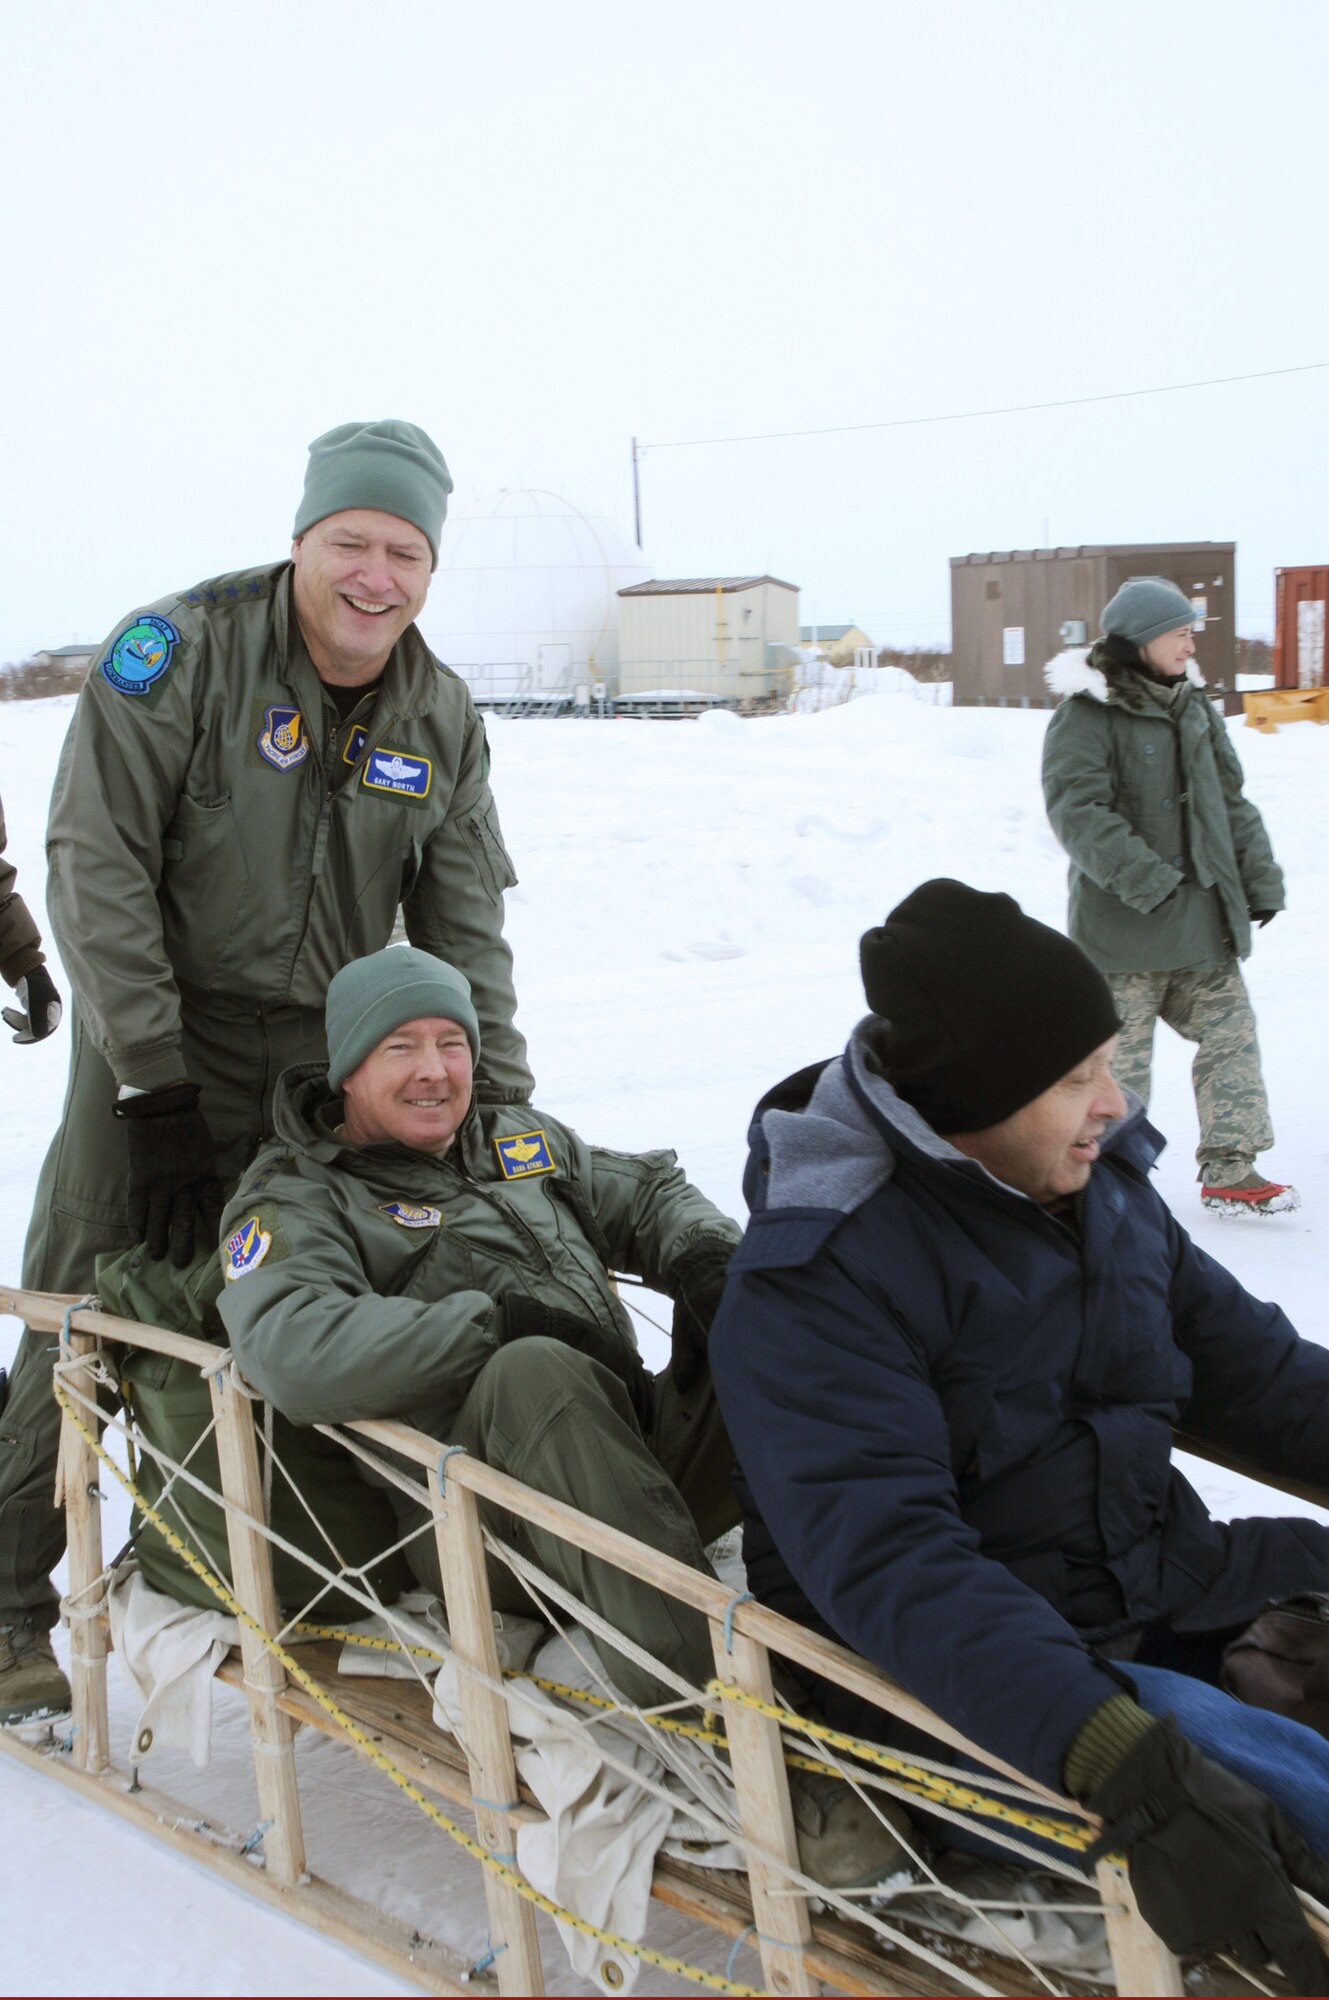 Gen. Gary North, Lt. Gen. Dana Atkins and Robert Smiley prepare for a snow-machine ride from the airport to the local clinic April 17, 2010, in Selawik, Alaska. General North is the Pacific Air Forces commander, General Atkins is the Alaskan Command commander and Mr. Smiley is the Office of Secretary of Defense acting Reserve Affairs deputy assistant secretary. (U.S. Air Force photo/Tech. Sgt. Melissa E. Chatham)